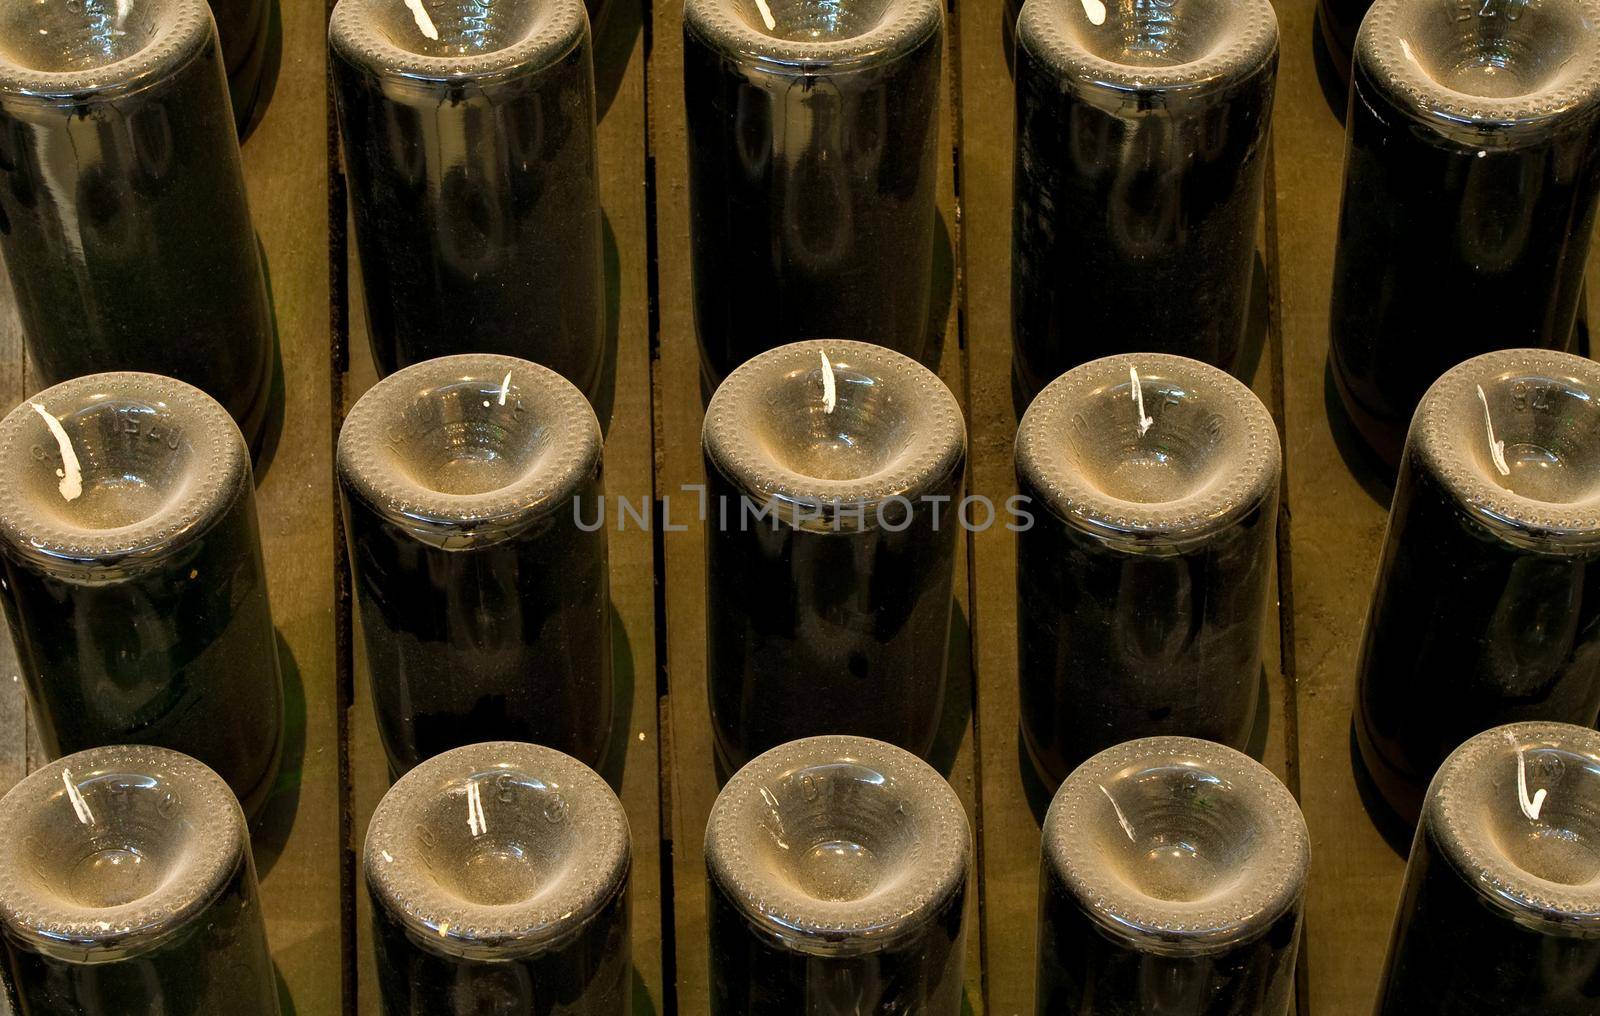 aging champagne bottles in the cellars of the winery